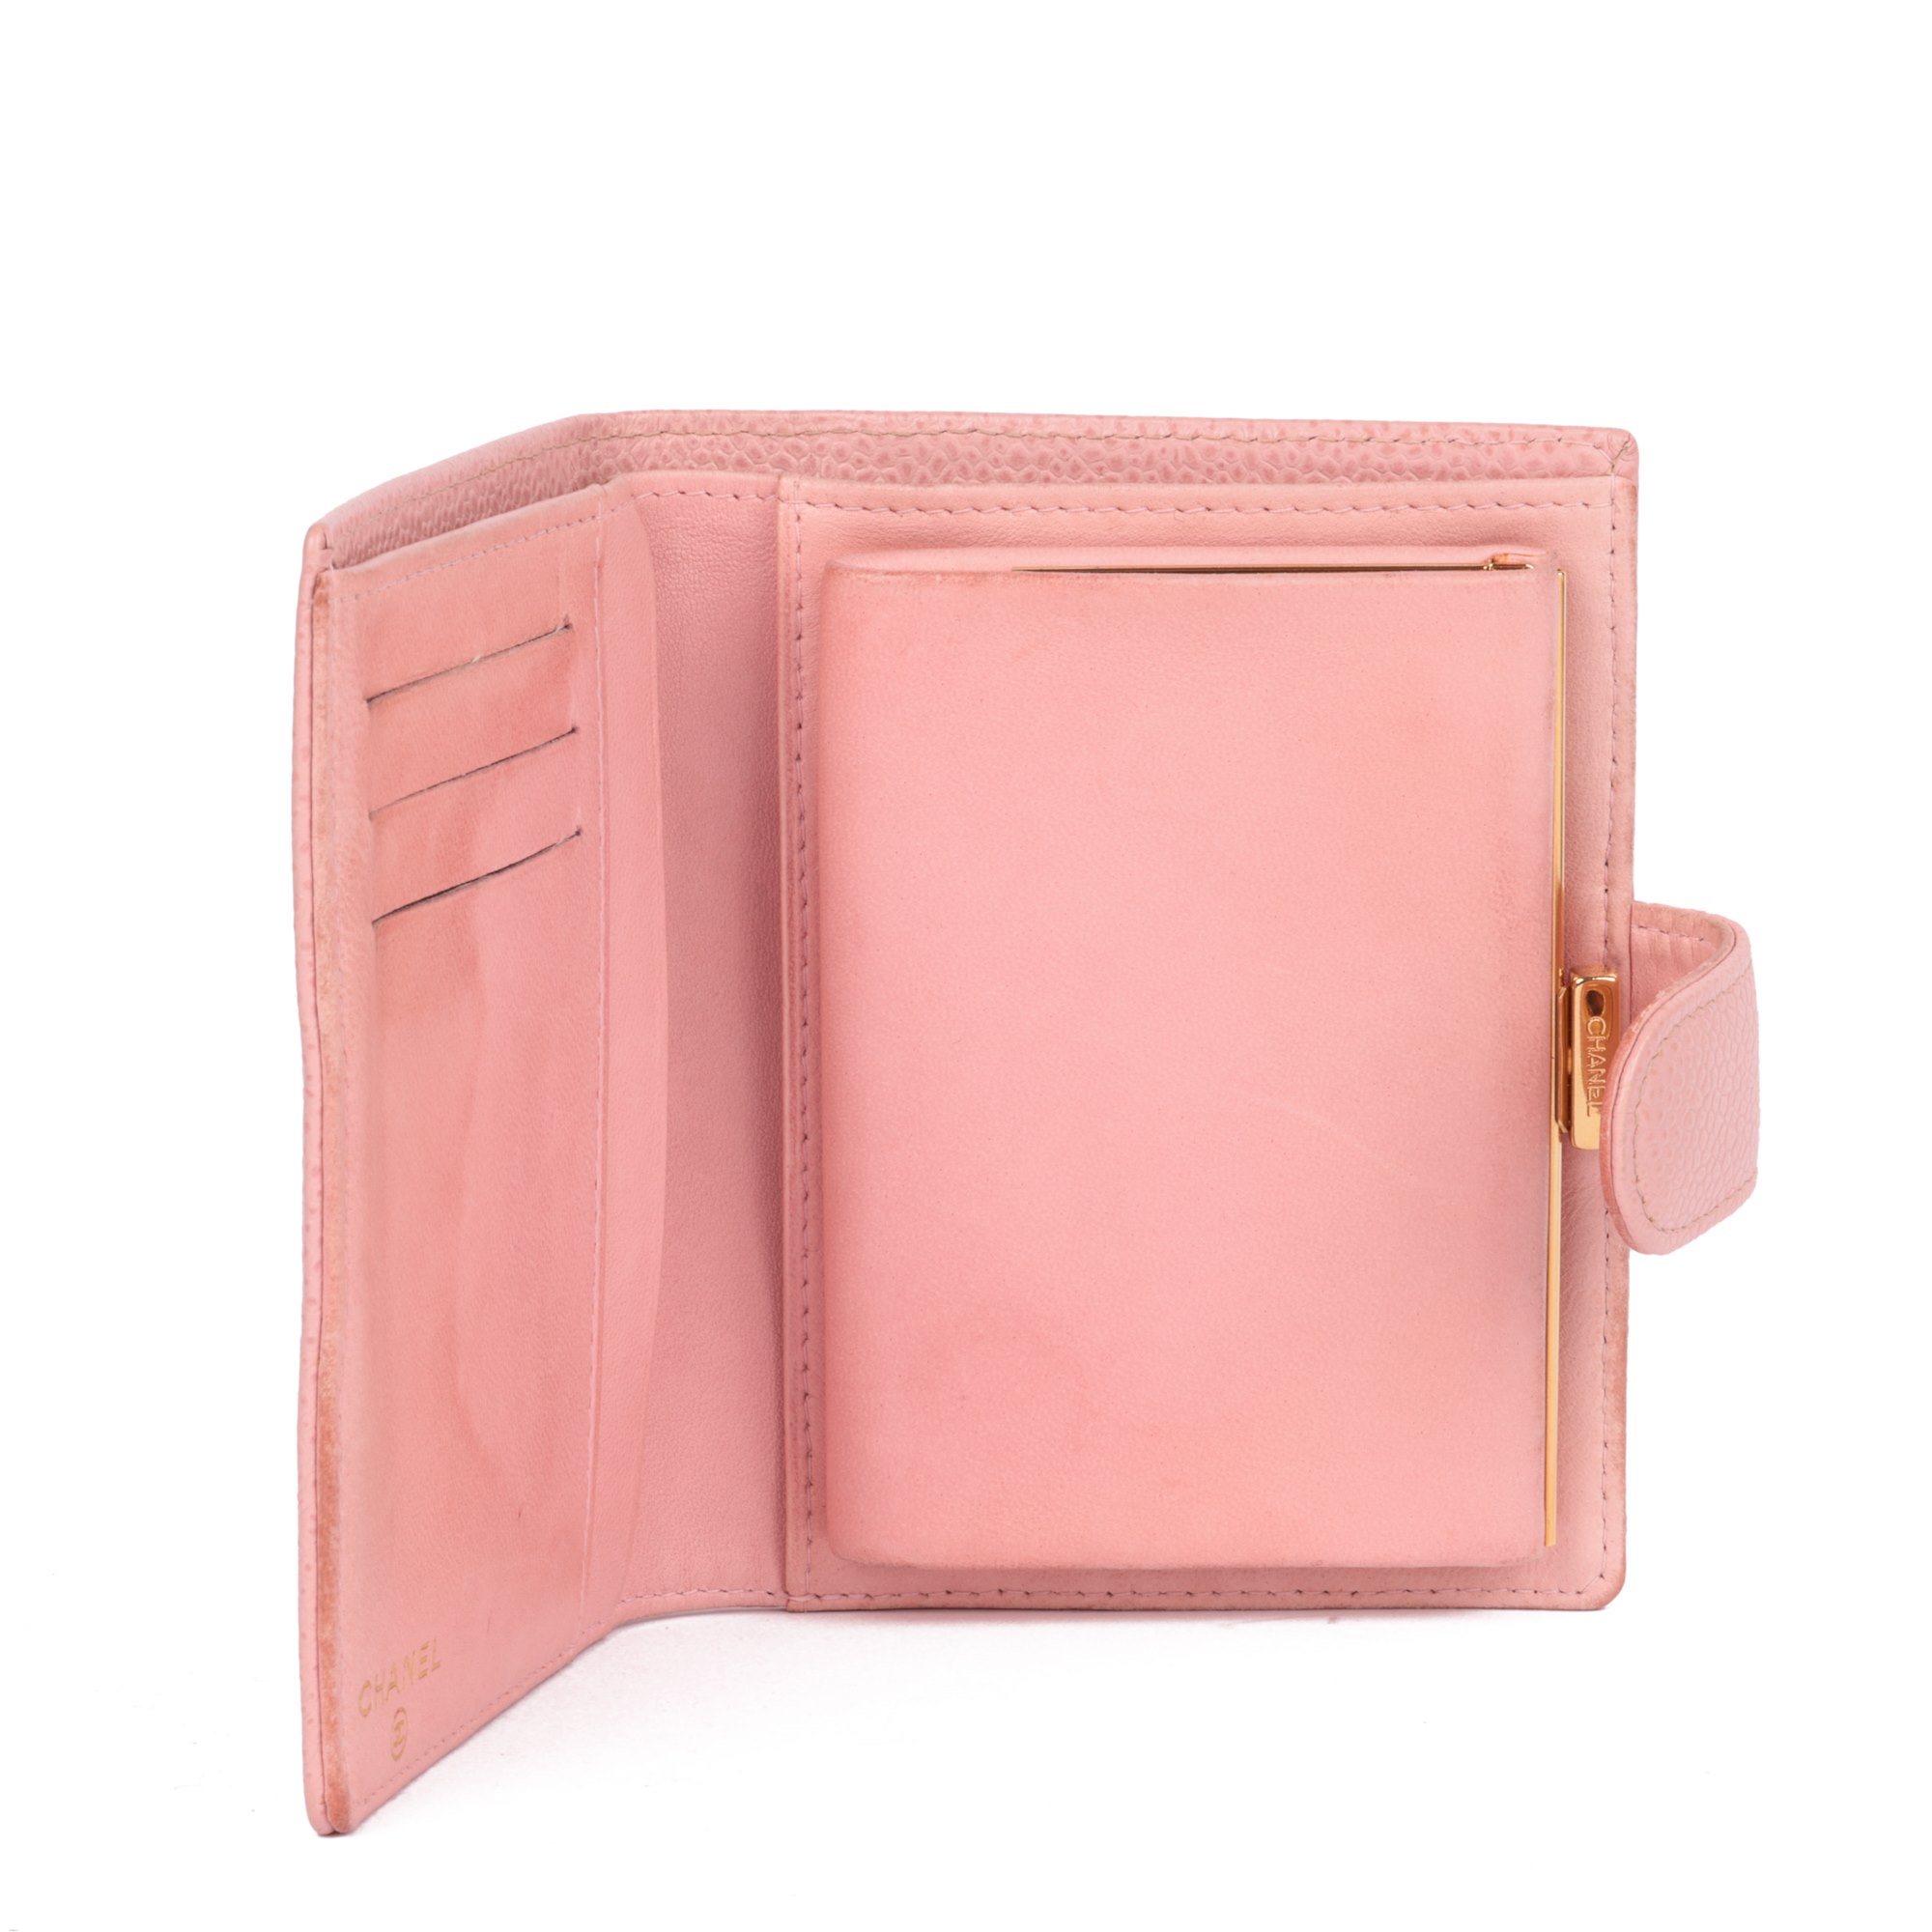 Chanel Pink Caviar Leather Timeless Compact Wallet